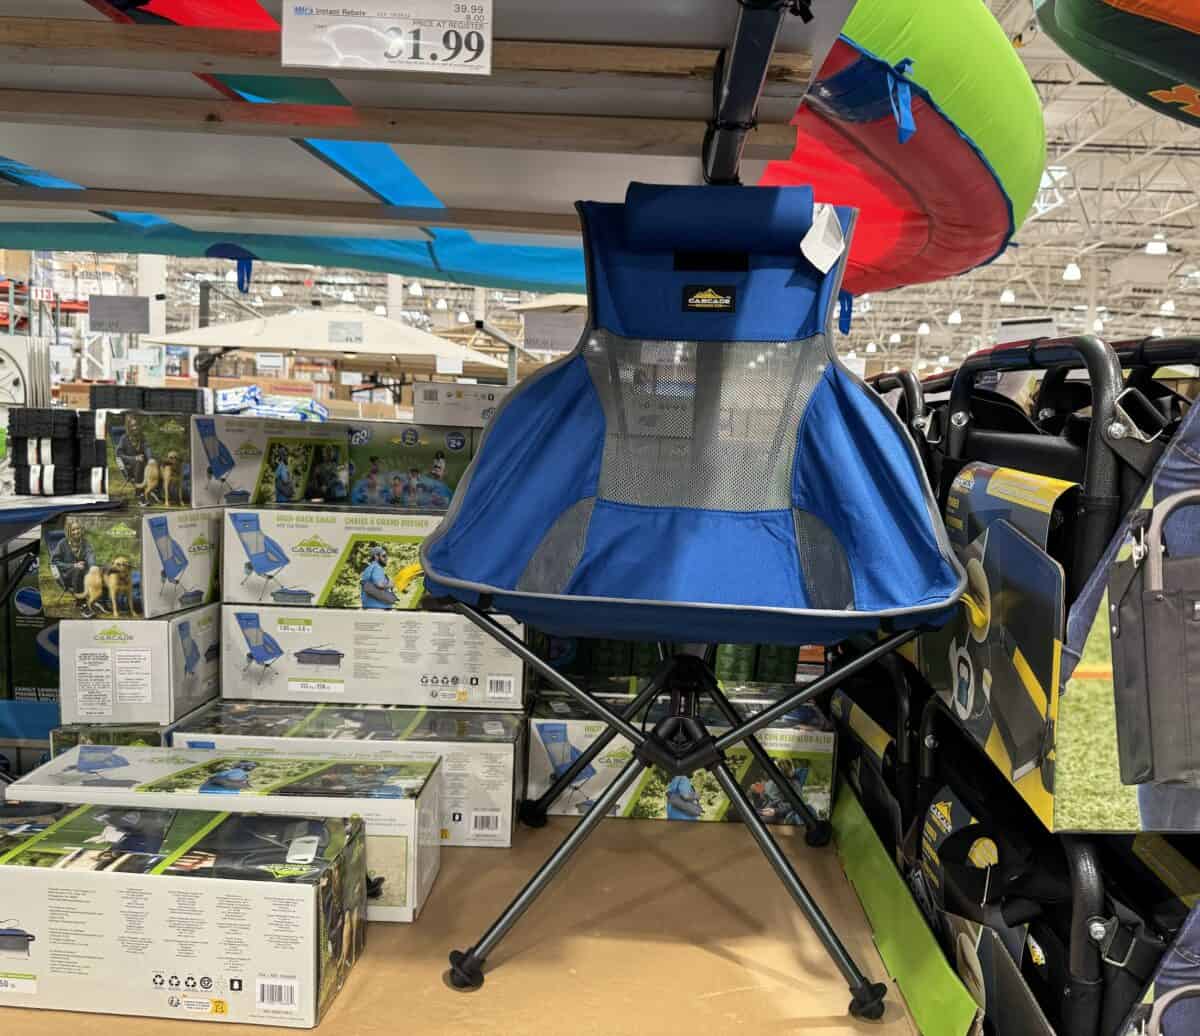 Packable Chair at Costco